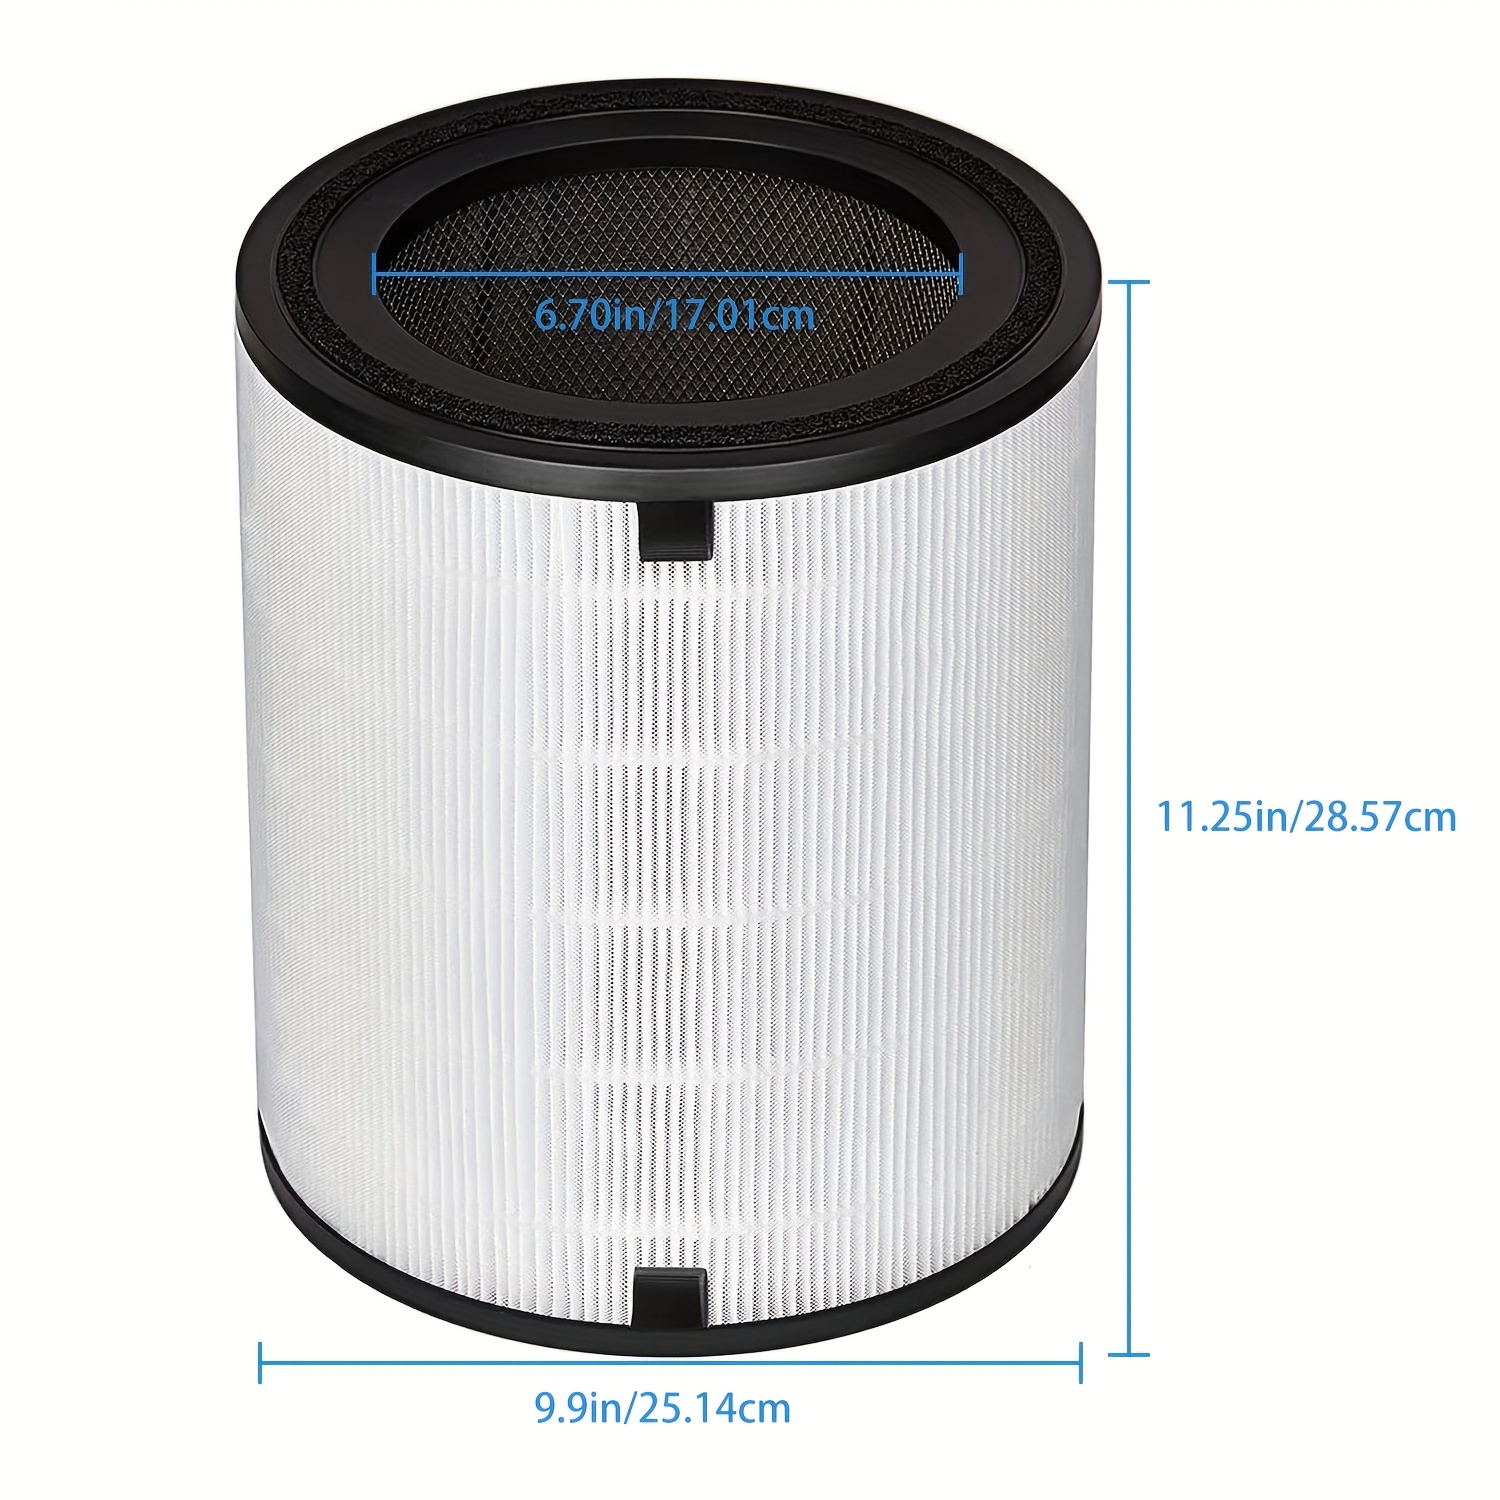  LEVOIT LV-H128 Air Purifier Replacement, 3-in-1 Pre-Filter,  Capture Dust Smoke Pollen, Activated Carbon, 3-Stage Filtration System, 2  Piece Set, LV-H128-RF, 1 Pack : Home & Kitchen